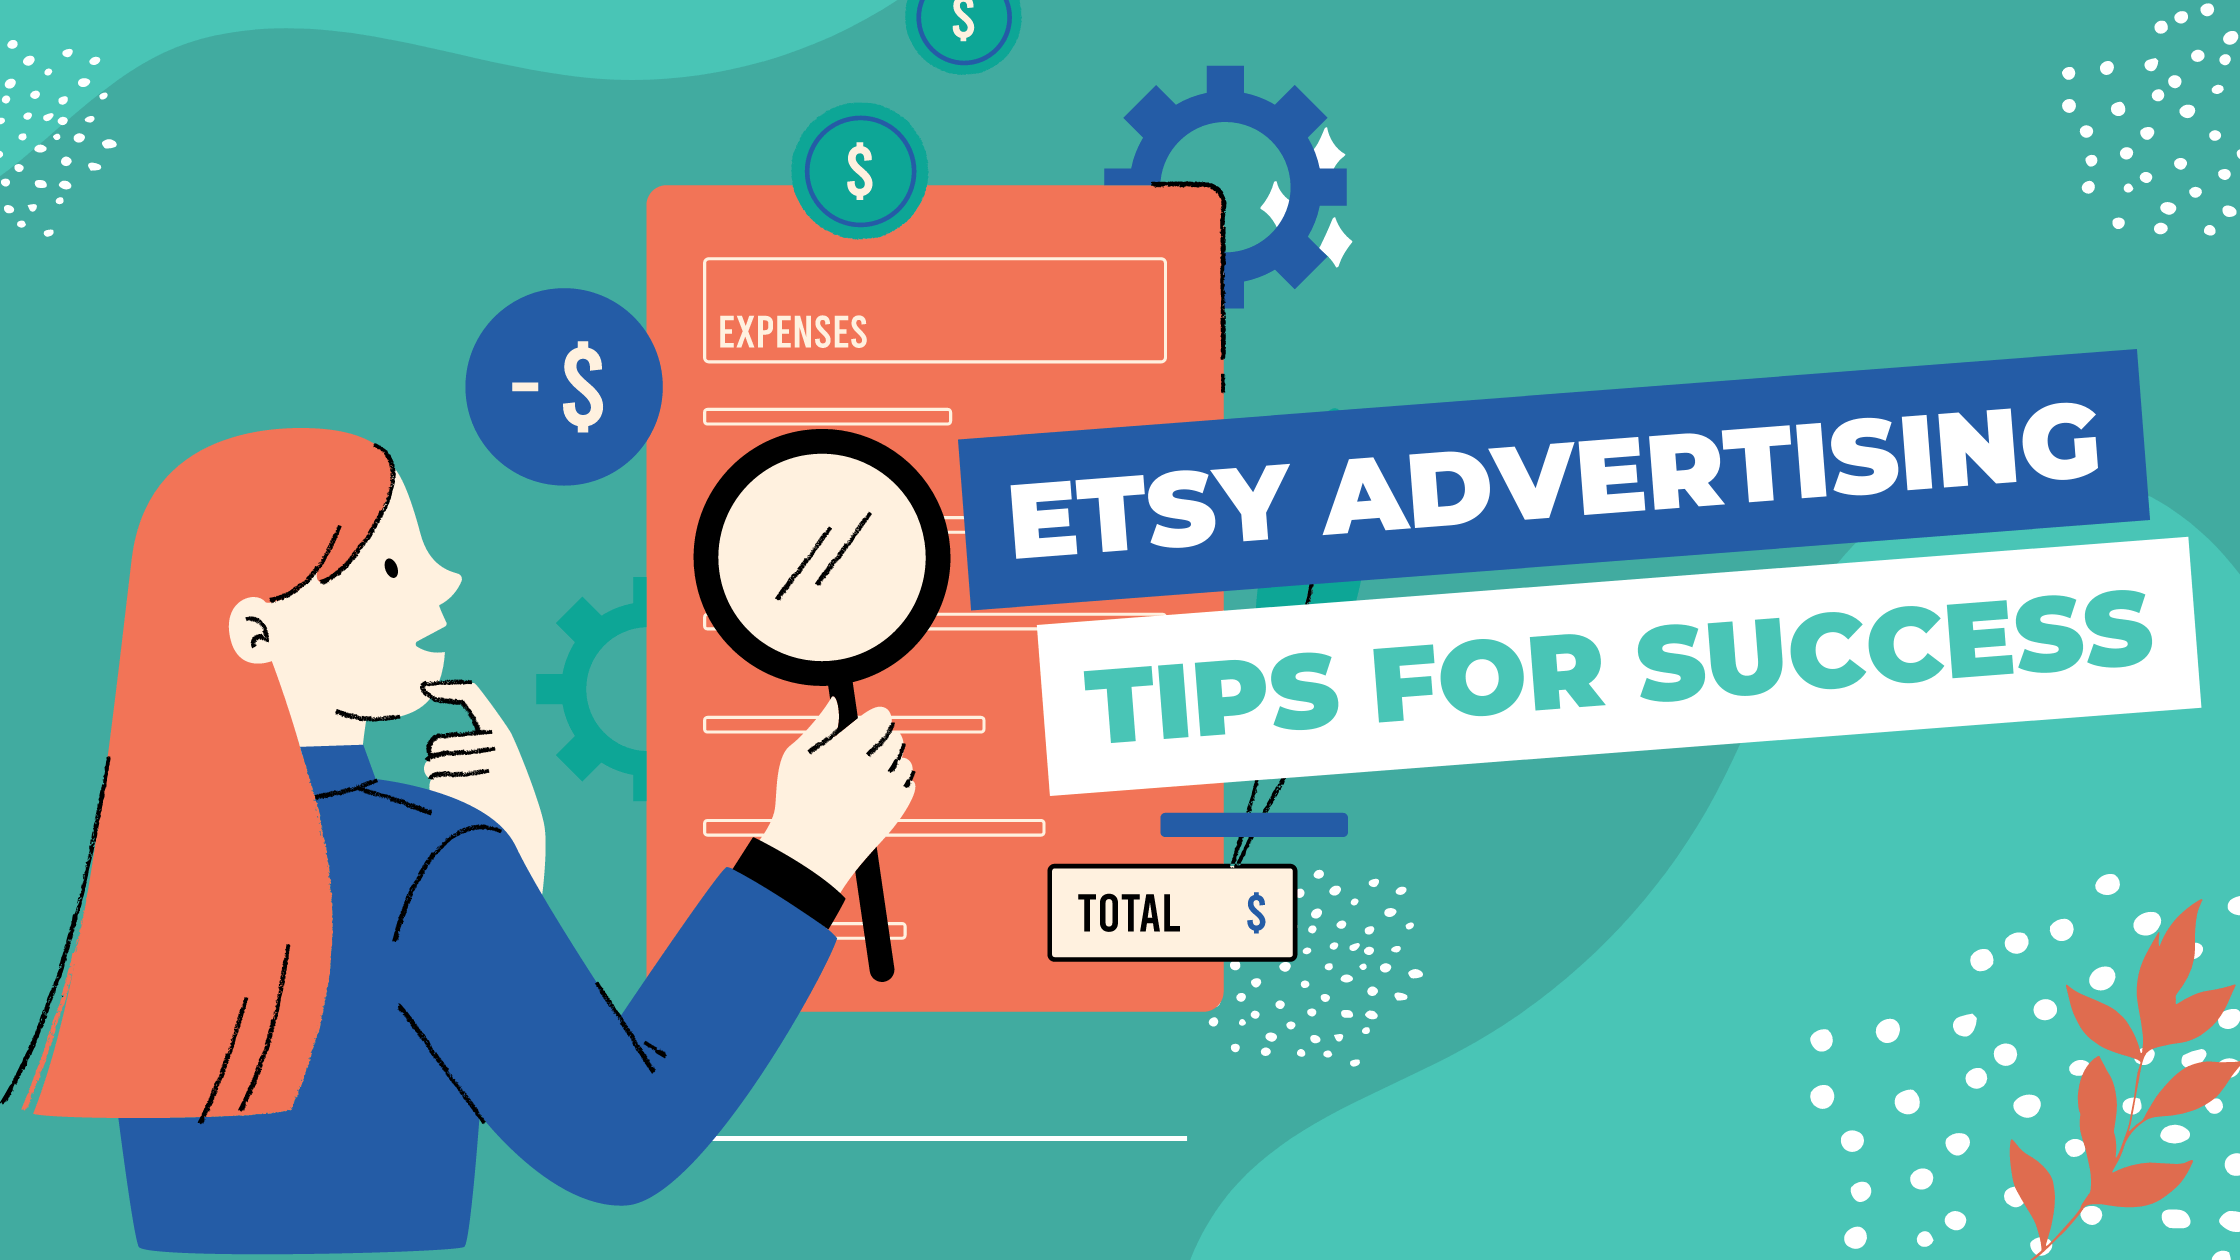 Etsy Advertising 101: A Beginner’s Guide to Promoting Your Etsy Shop